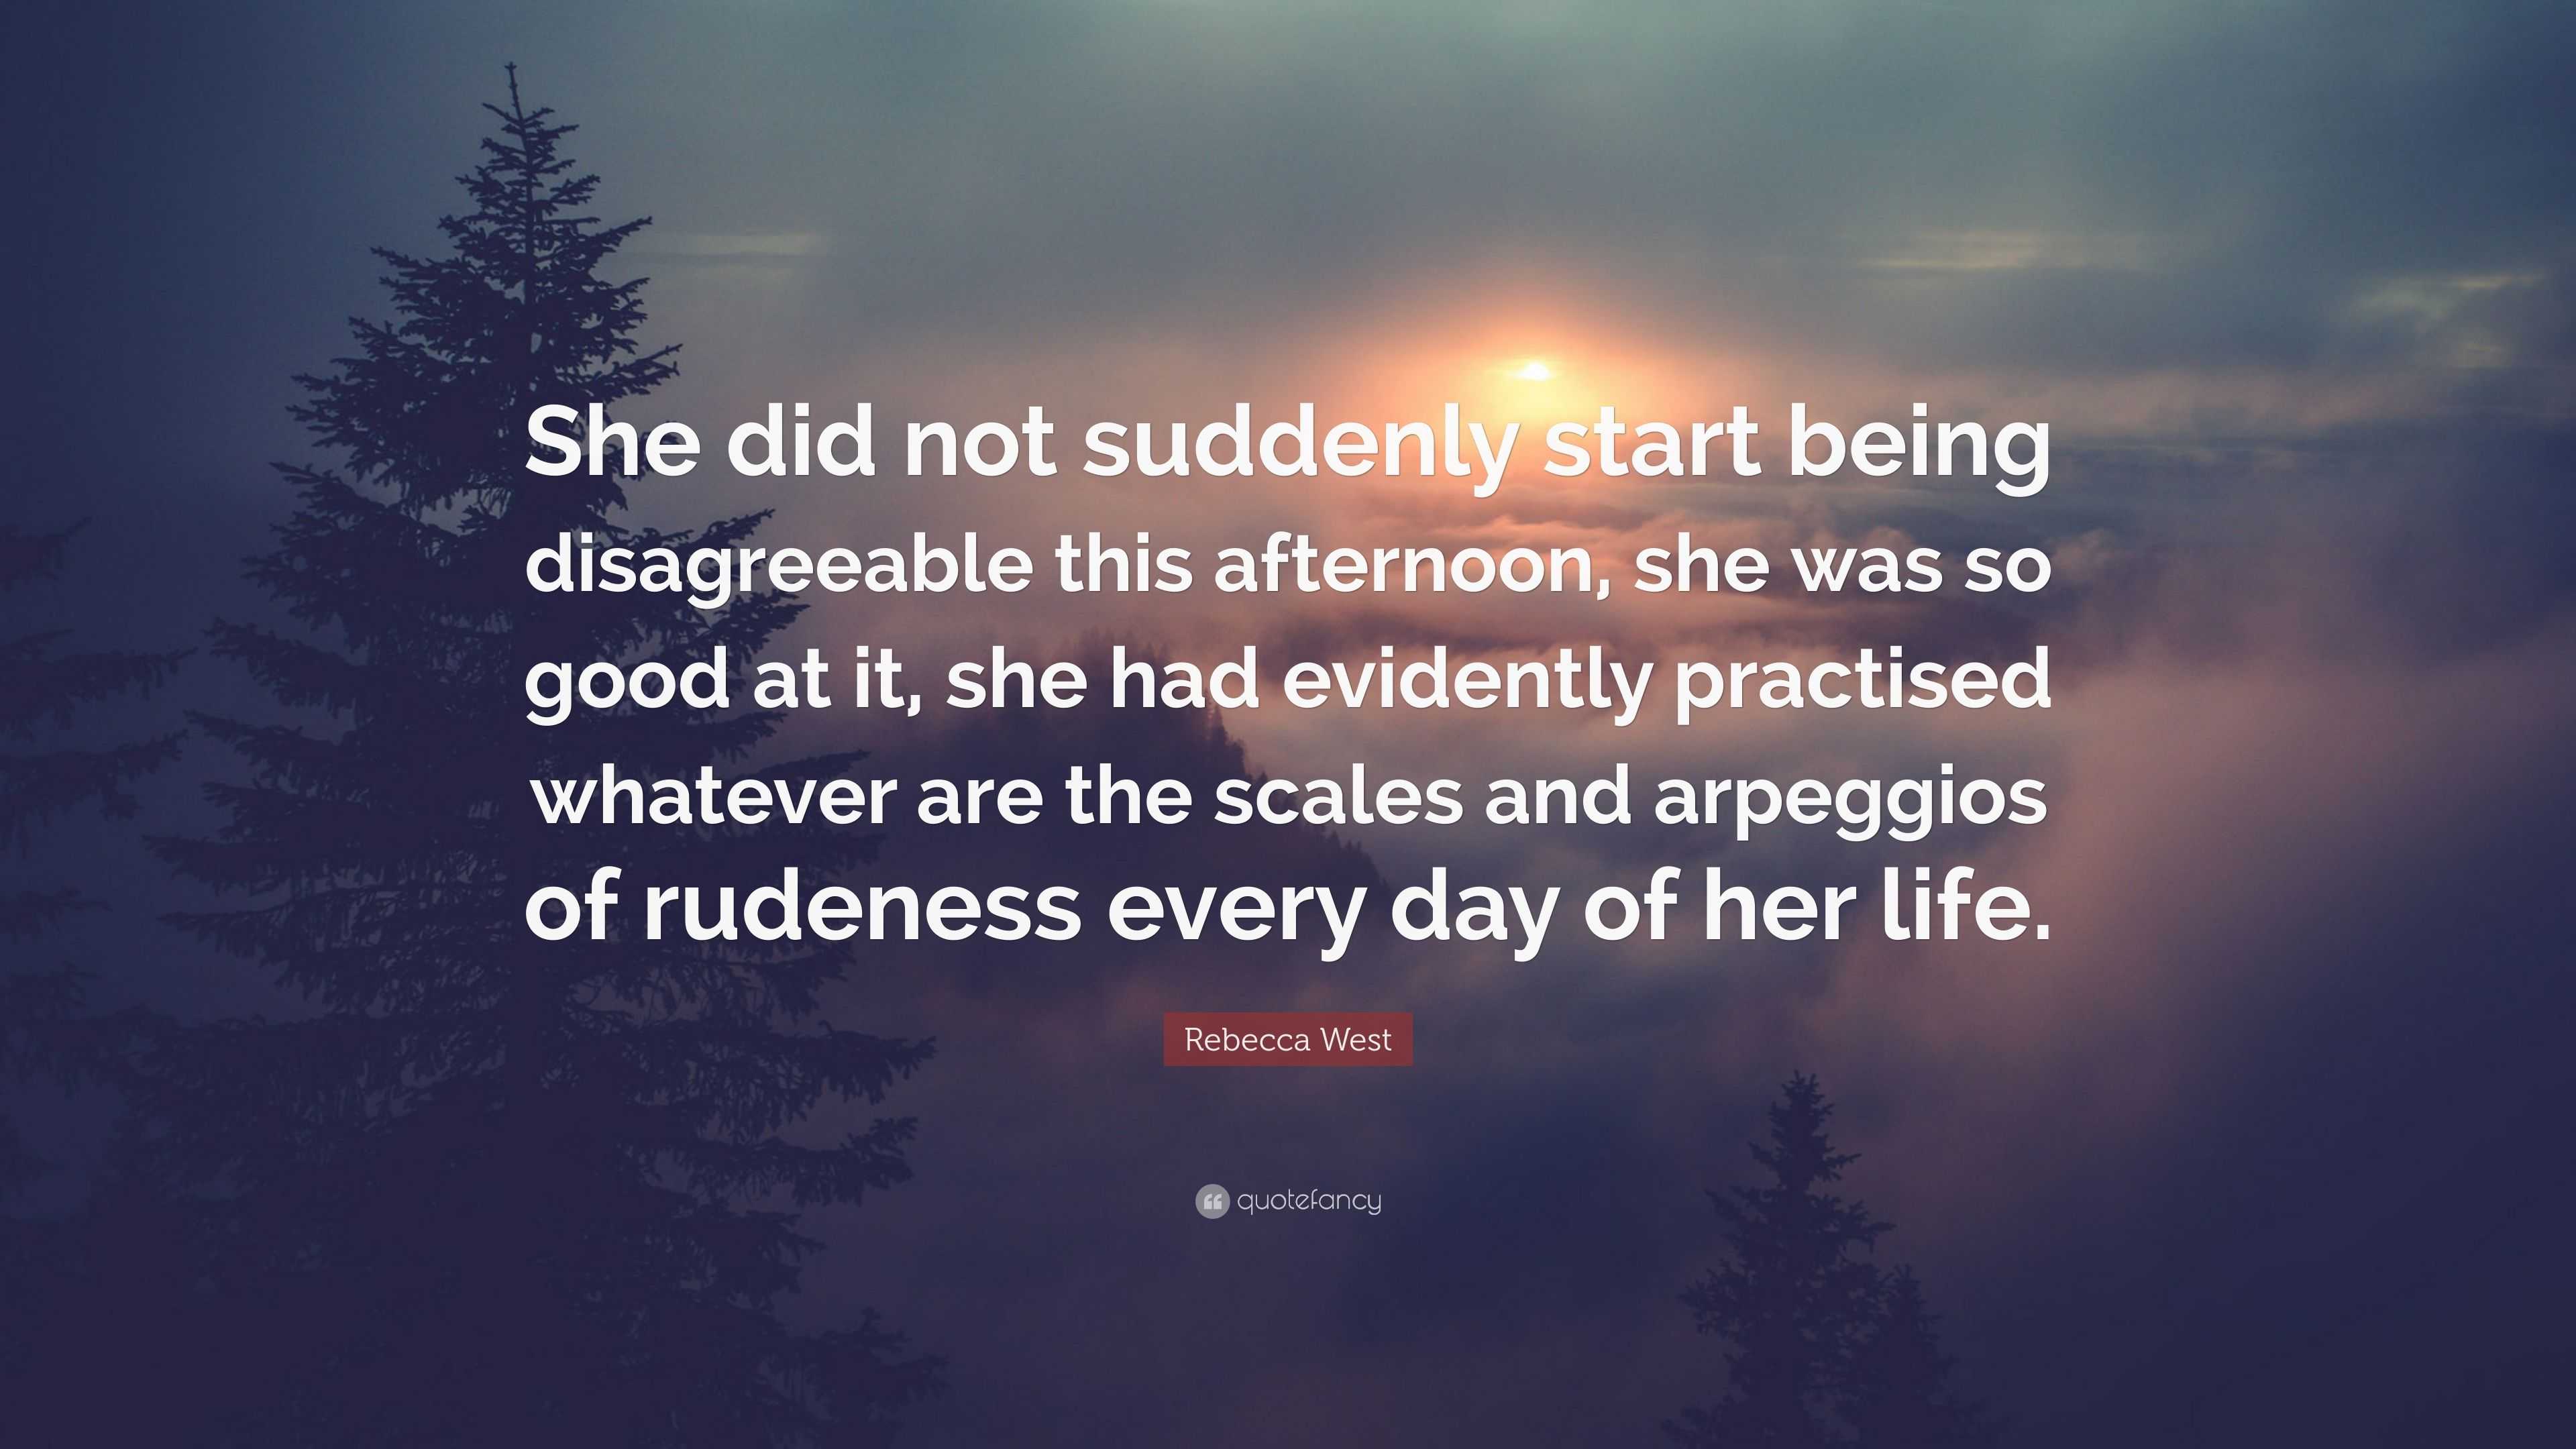 Rebecca West Quote: “She did not suddenly start being disagreeable this ...